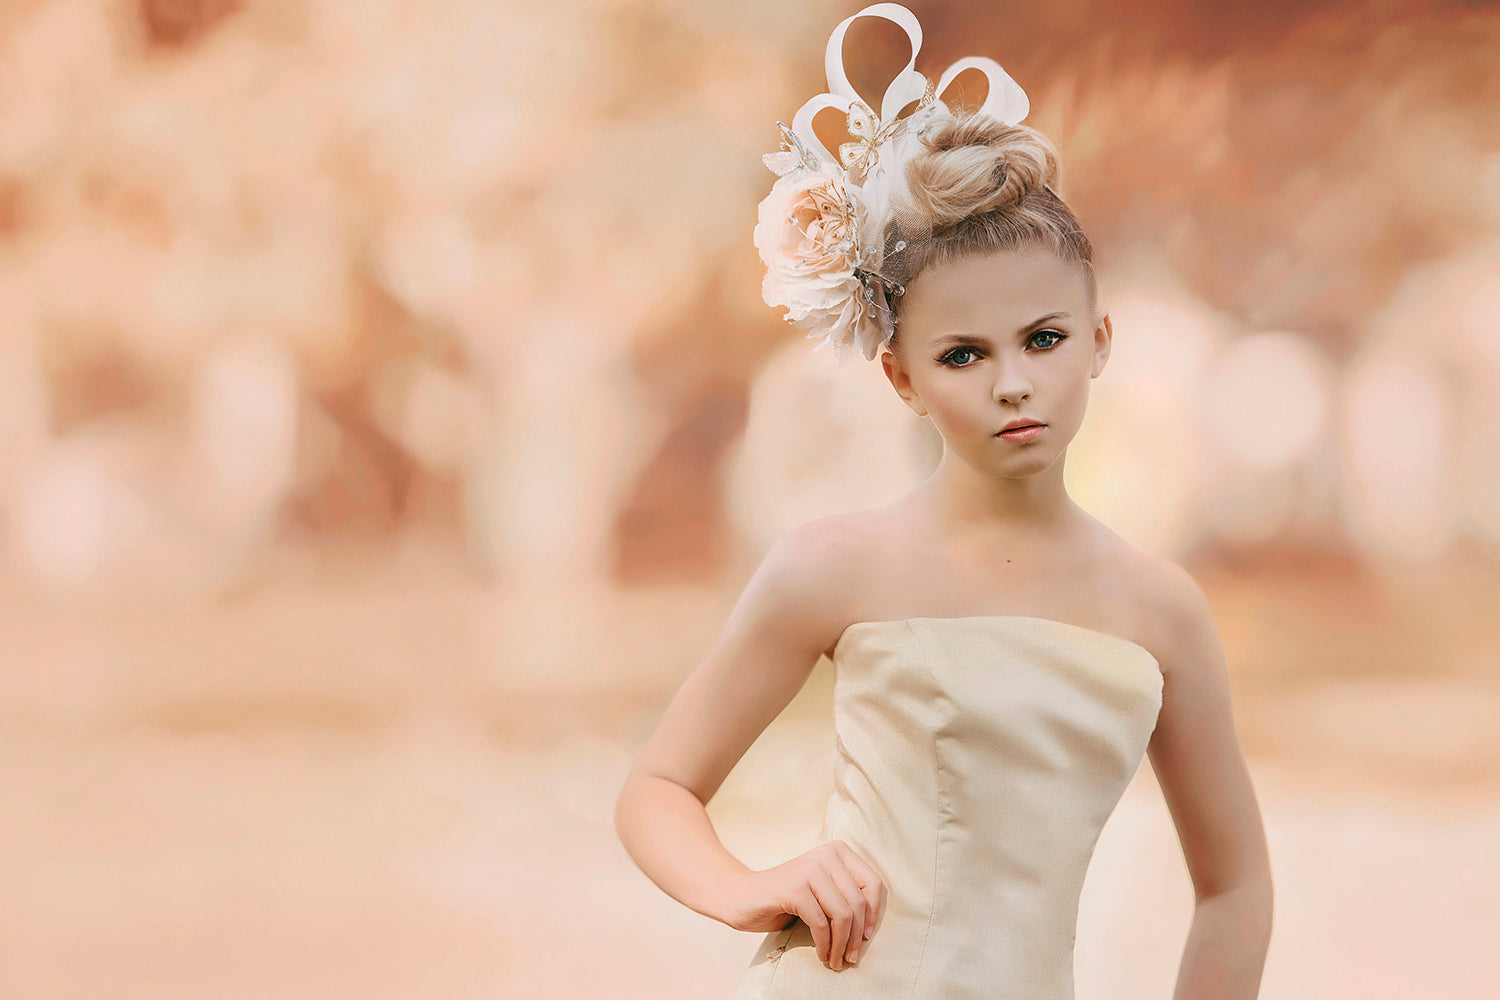 <alt>beautiful young girl in couture handmade headpiece with butterflies and tea roses by honeydrops designs</alt>